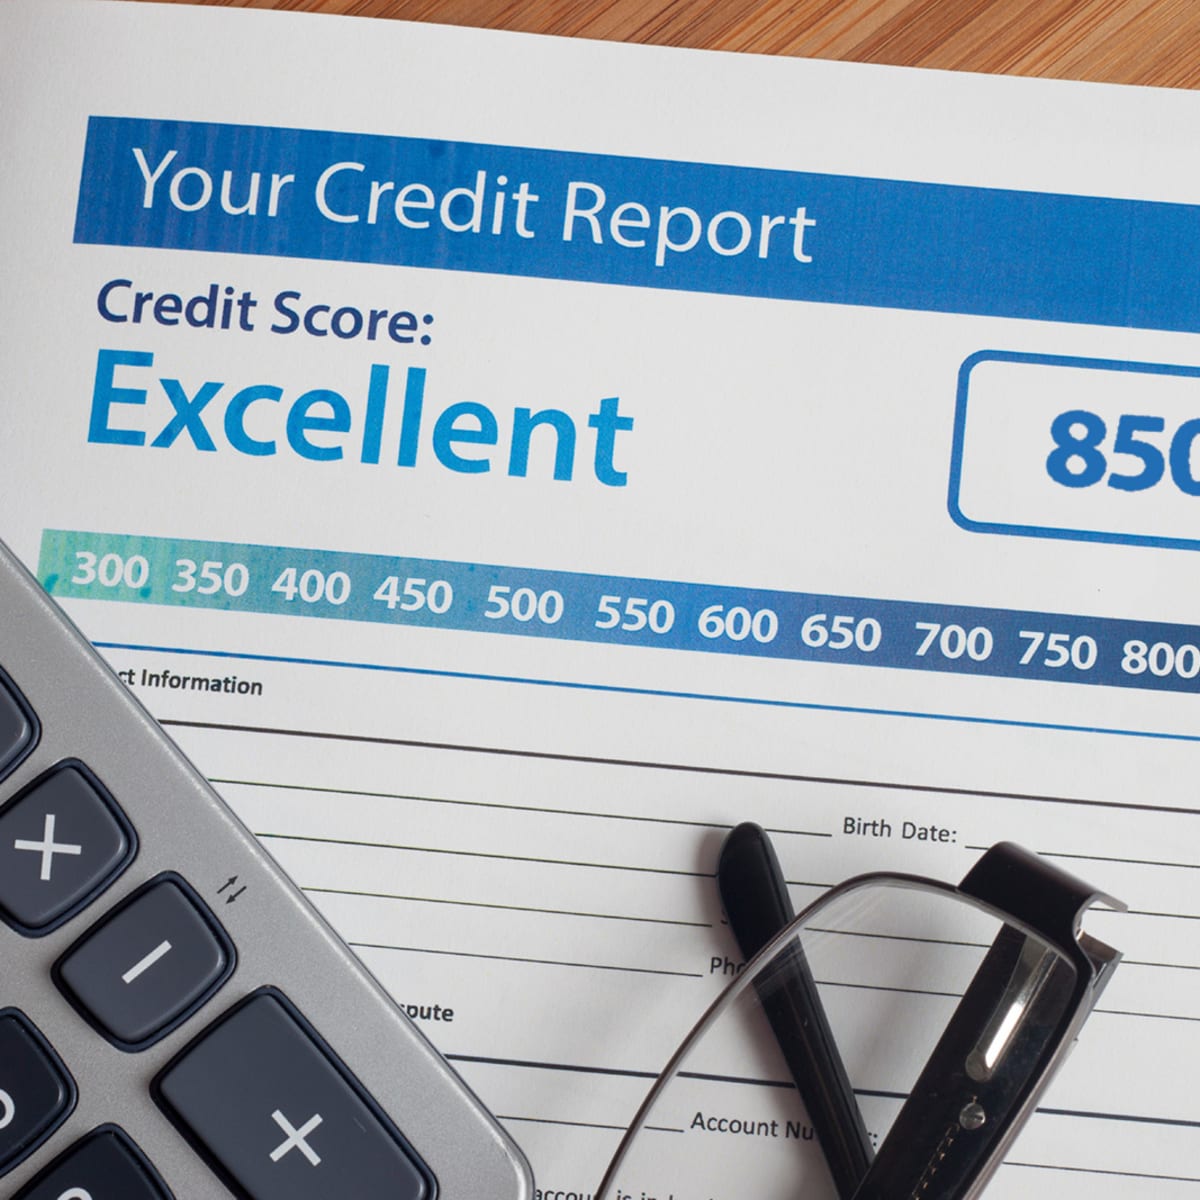 achieve the highest possible credit score Here's how to achieve the highest possible credit score? - 1